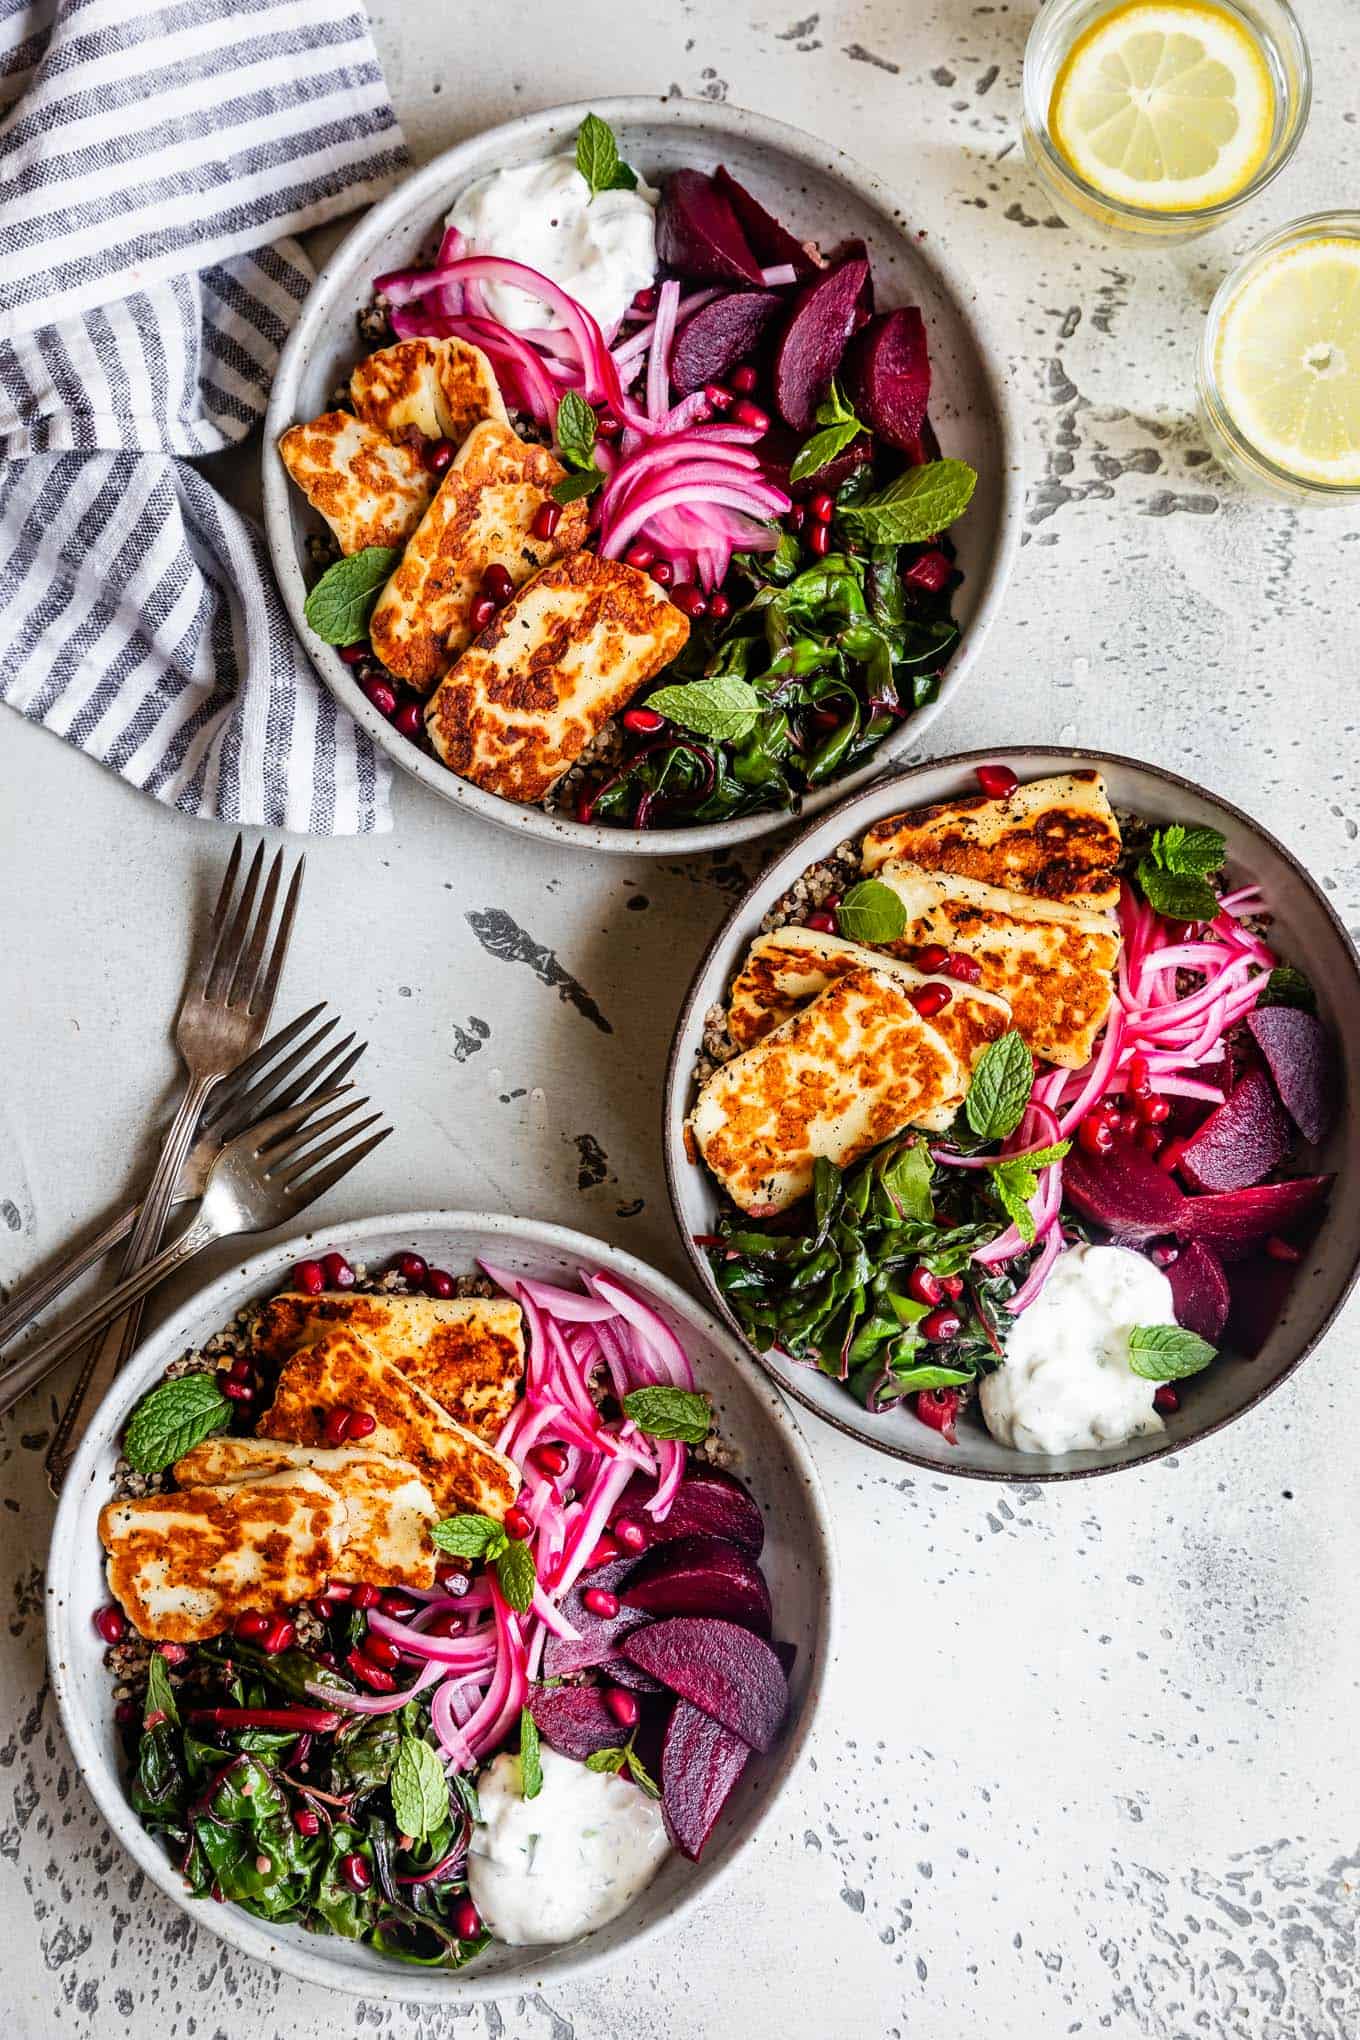 Fried Halloumi Cheese Bowls over Quinoa with Beets